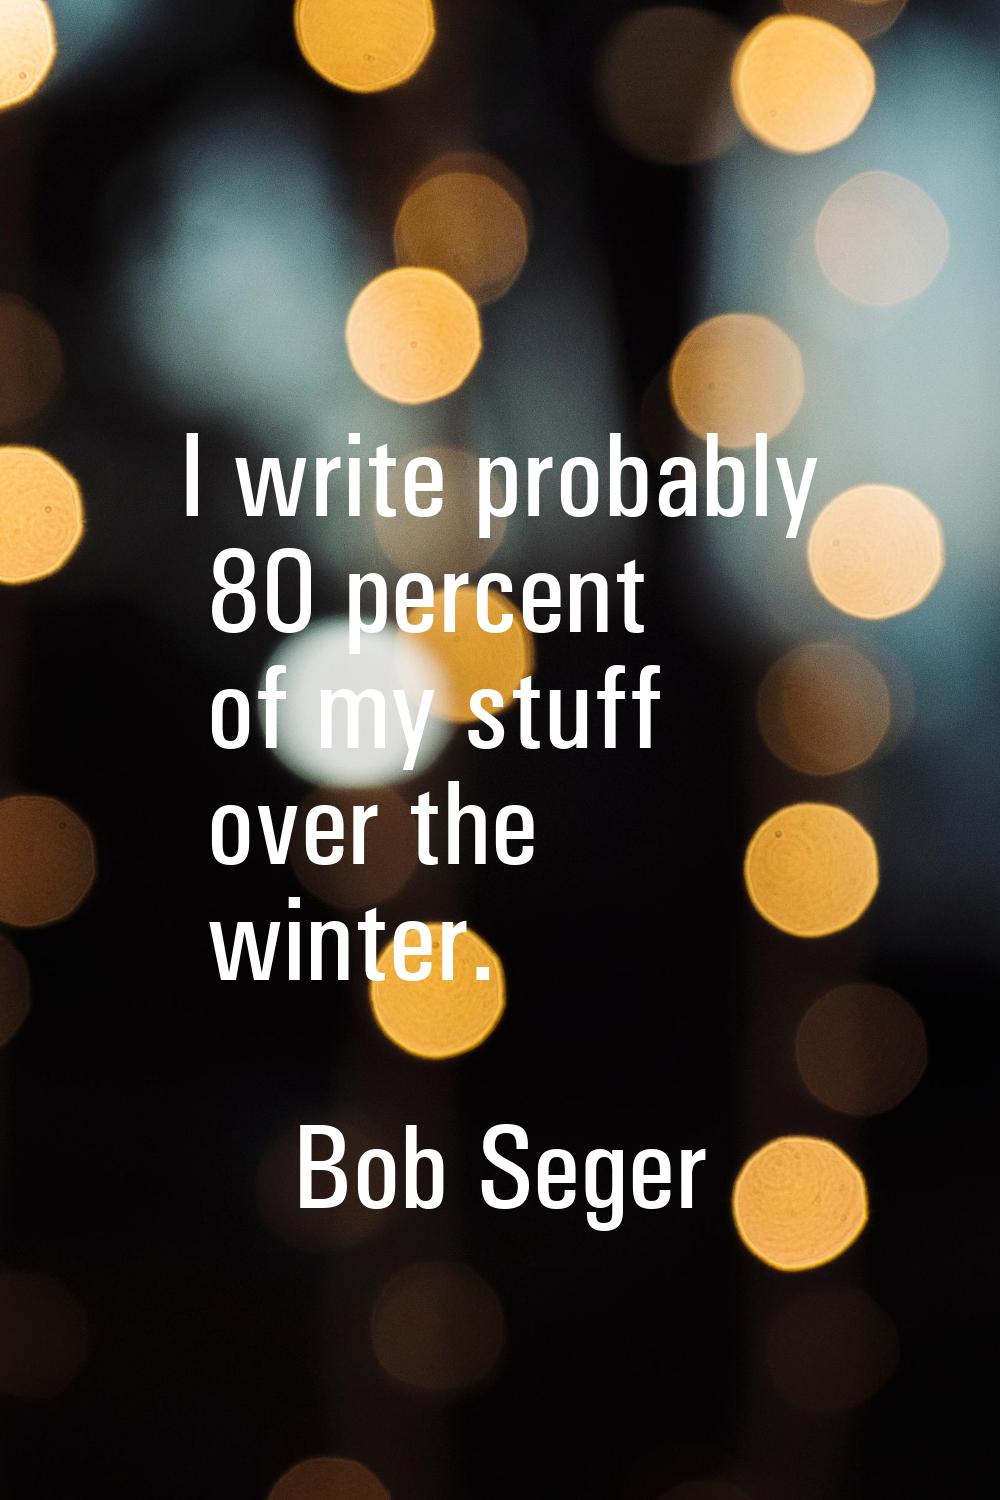 I write probably 80 percent of my stuff over the winter.